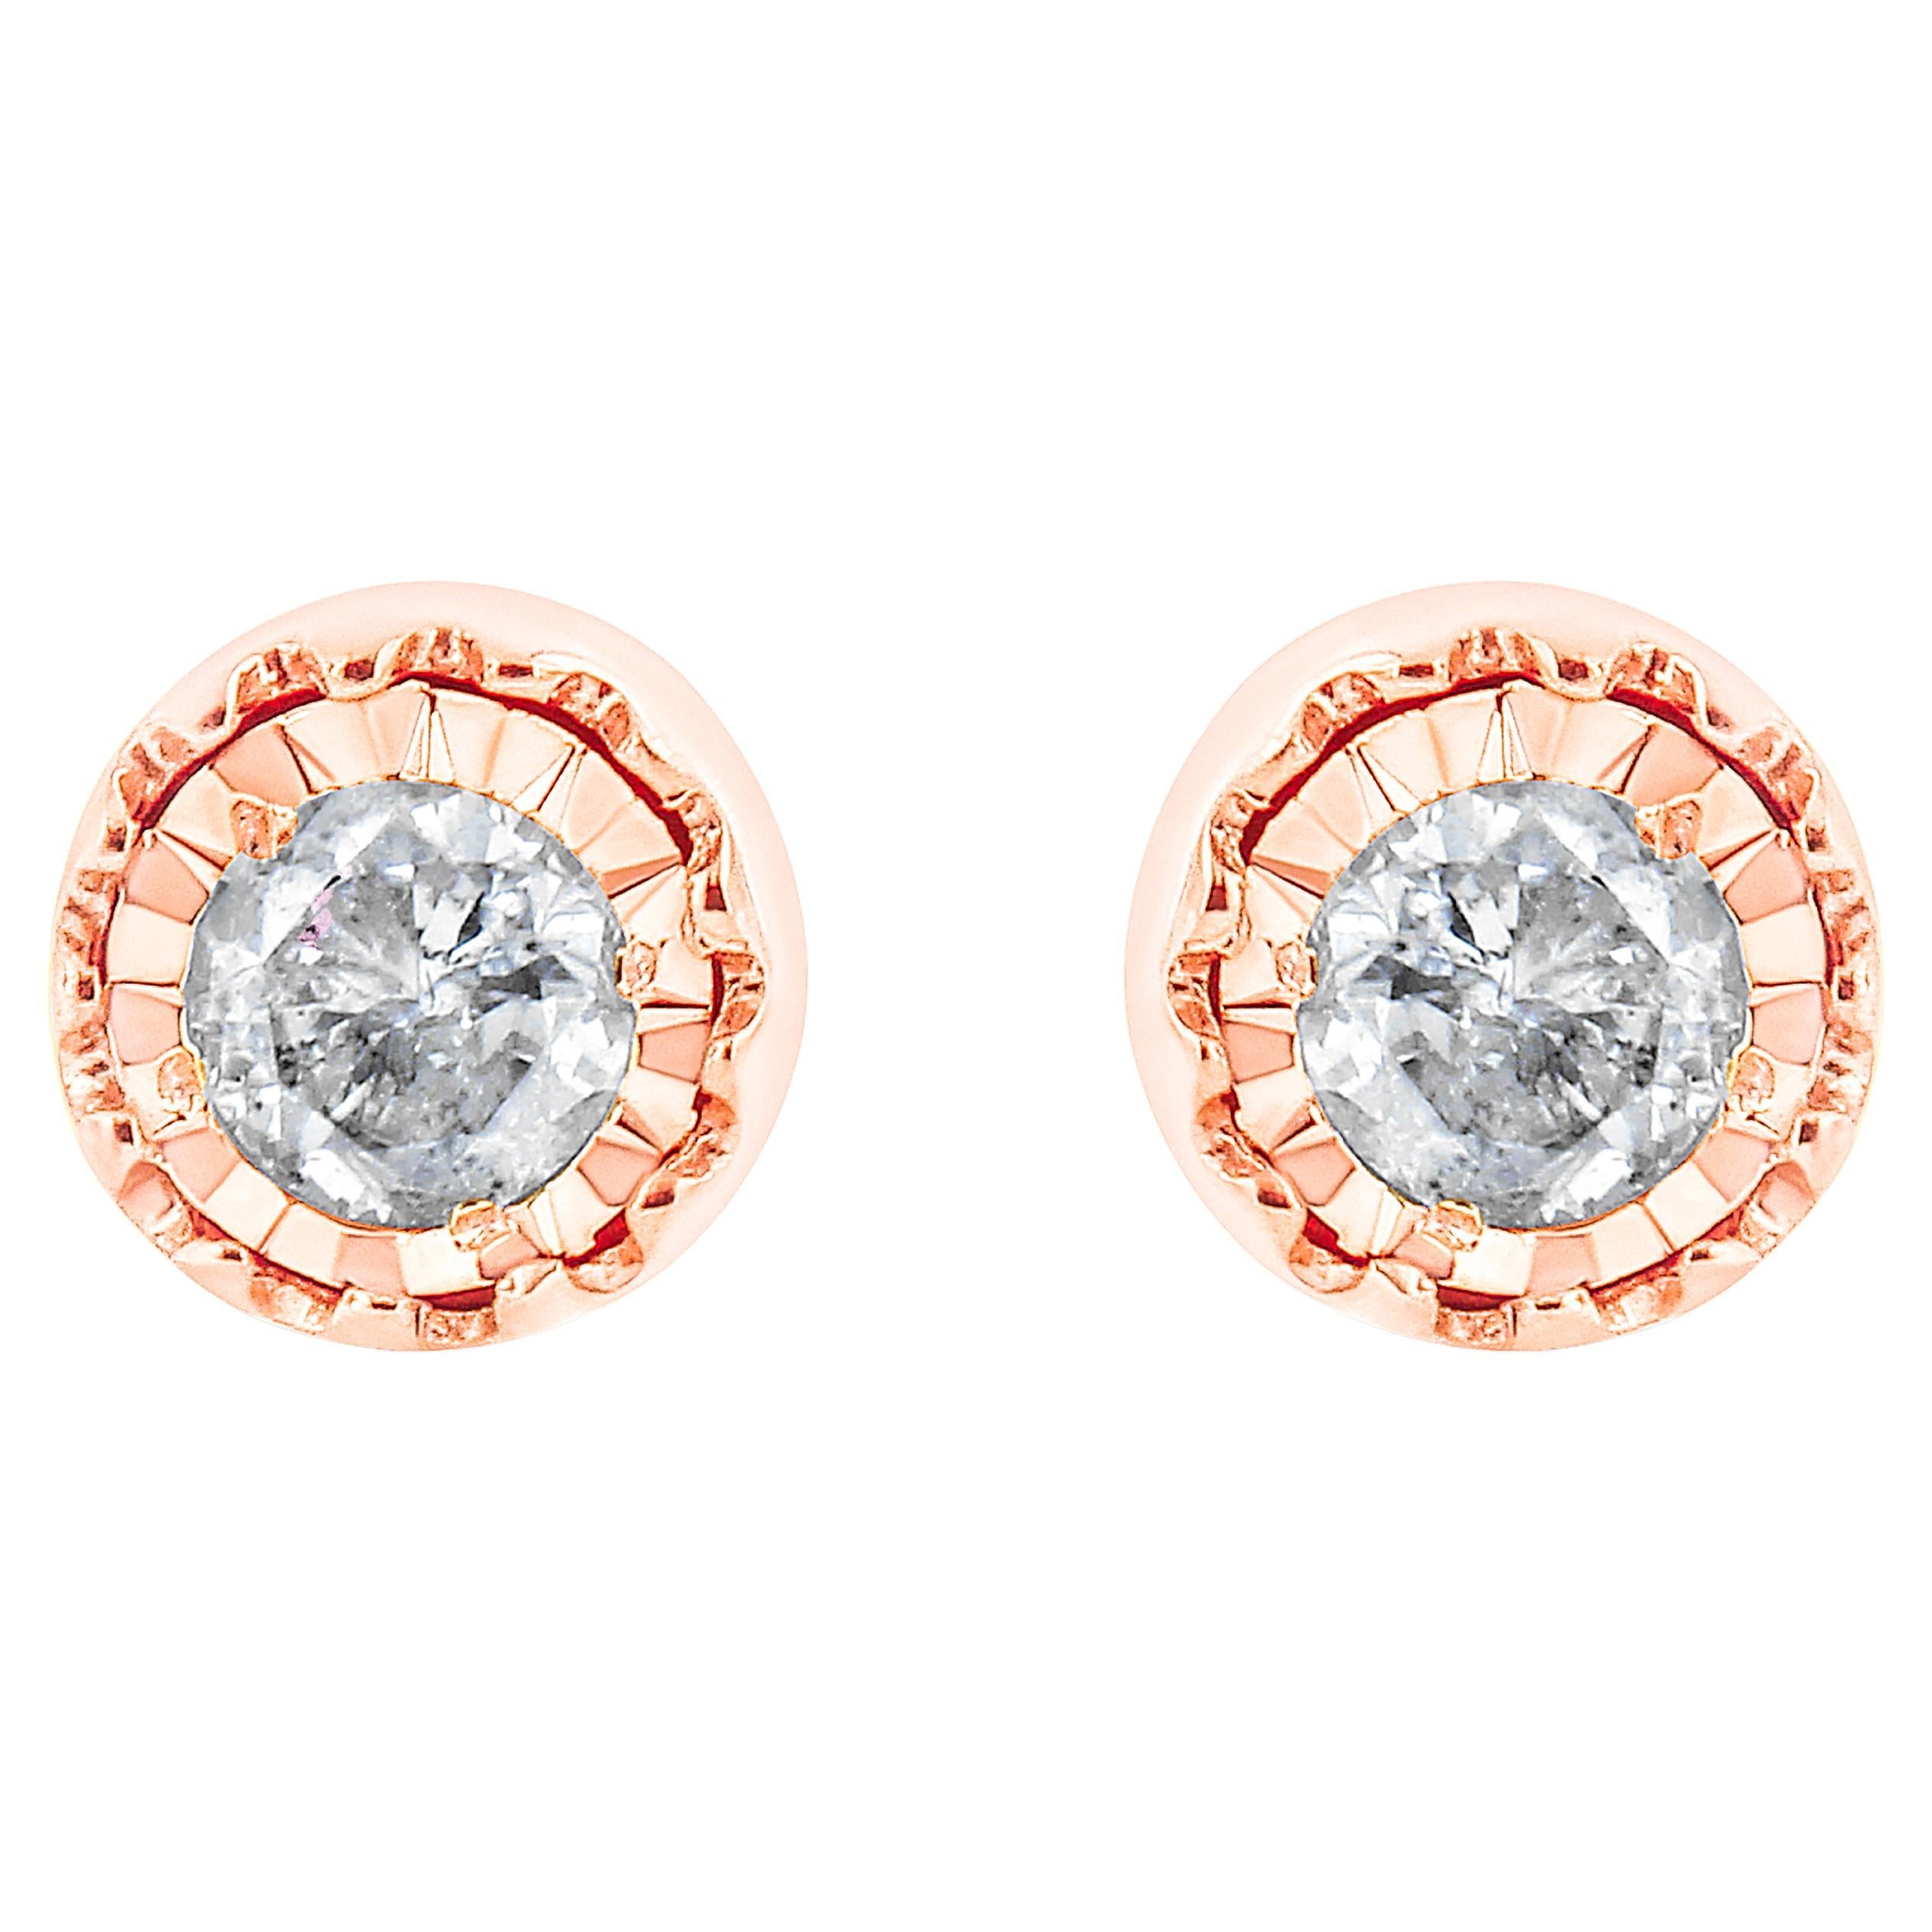 10K Rose Gold over Silver 3/8 Carat Diamond Miracle Set Stud Earrings